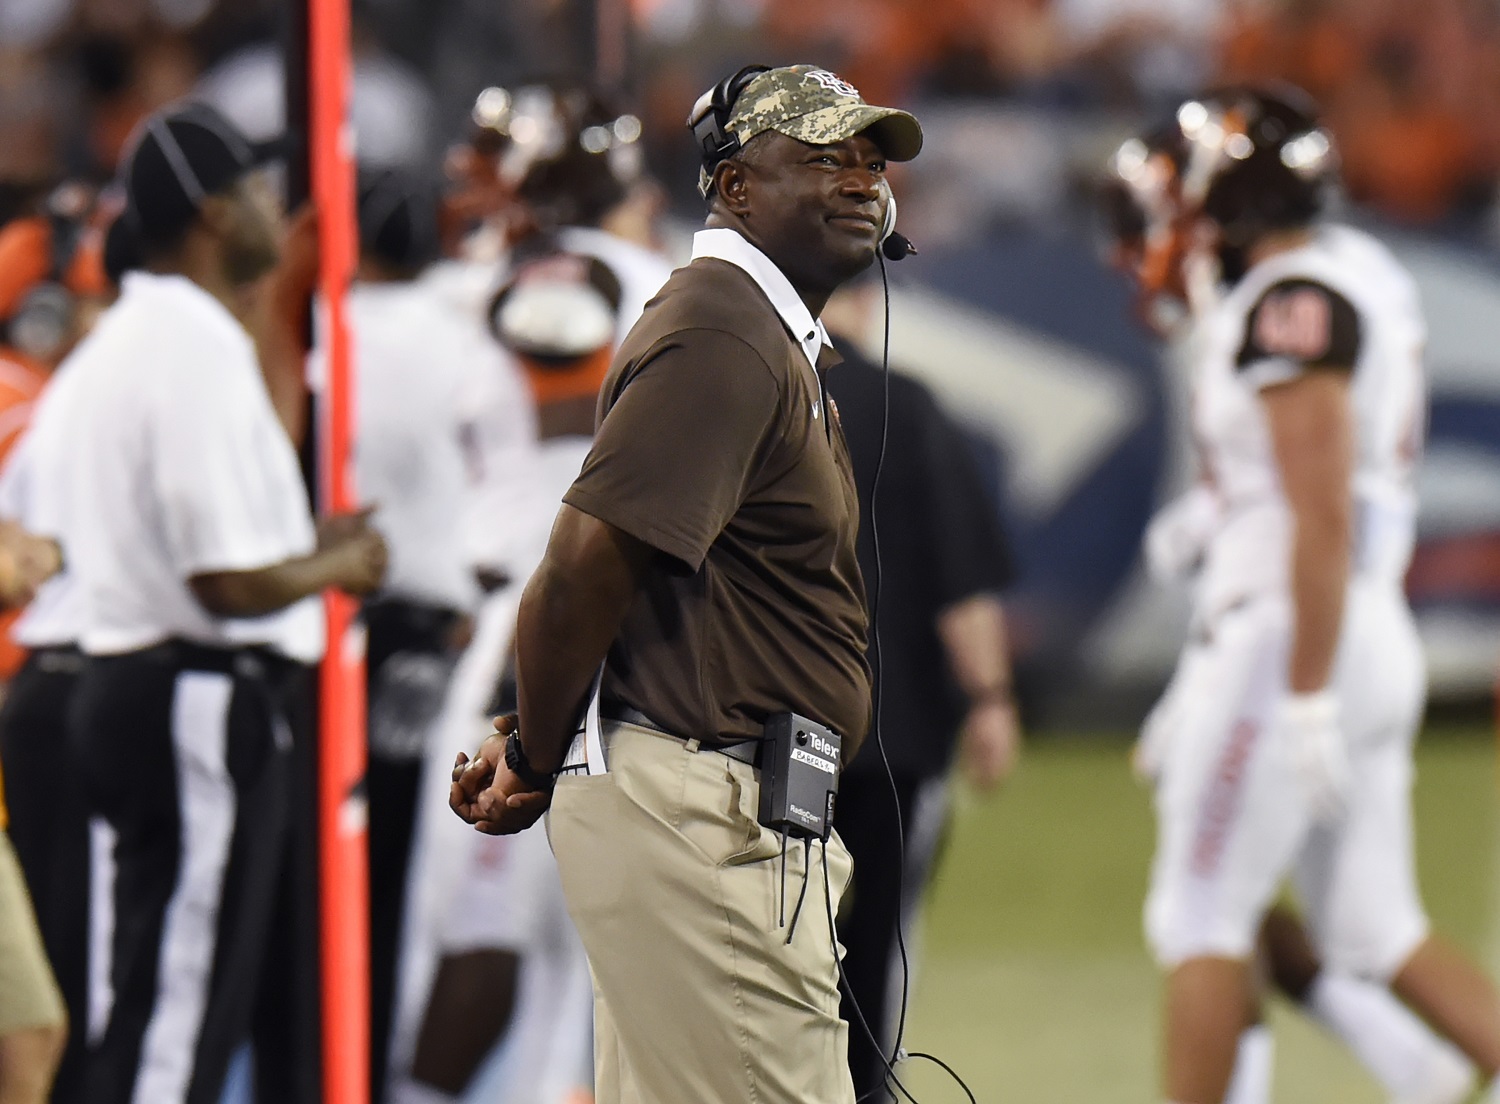 Bowling Green head coach Dino Babers watches from the sideline in the second half of an NCAA college football game against Tennessee Saturday, Sept. 5, 2015, in Nashville, Tenn. Tennessee won 59-30. (AP Photo/Mark Zaleski)